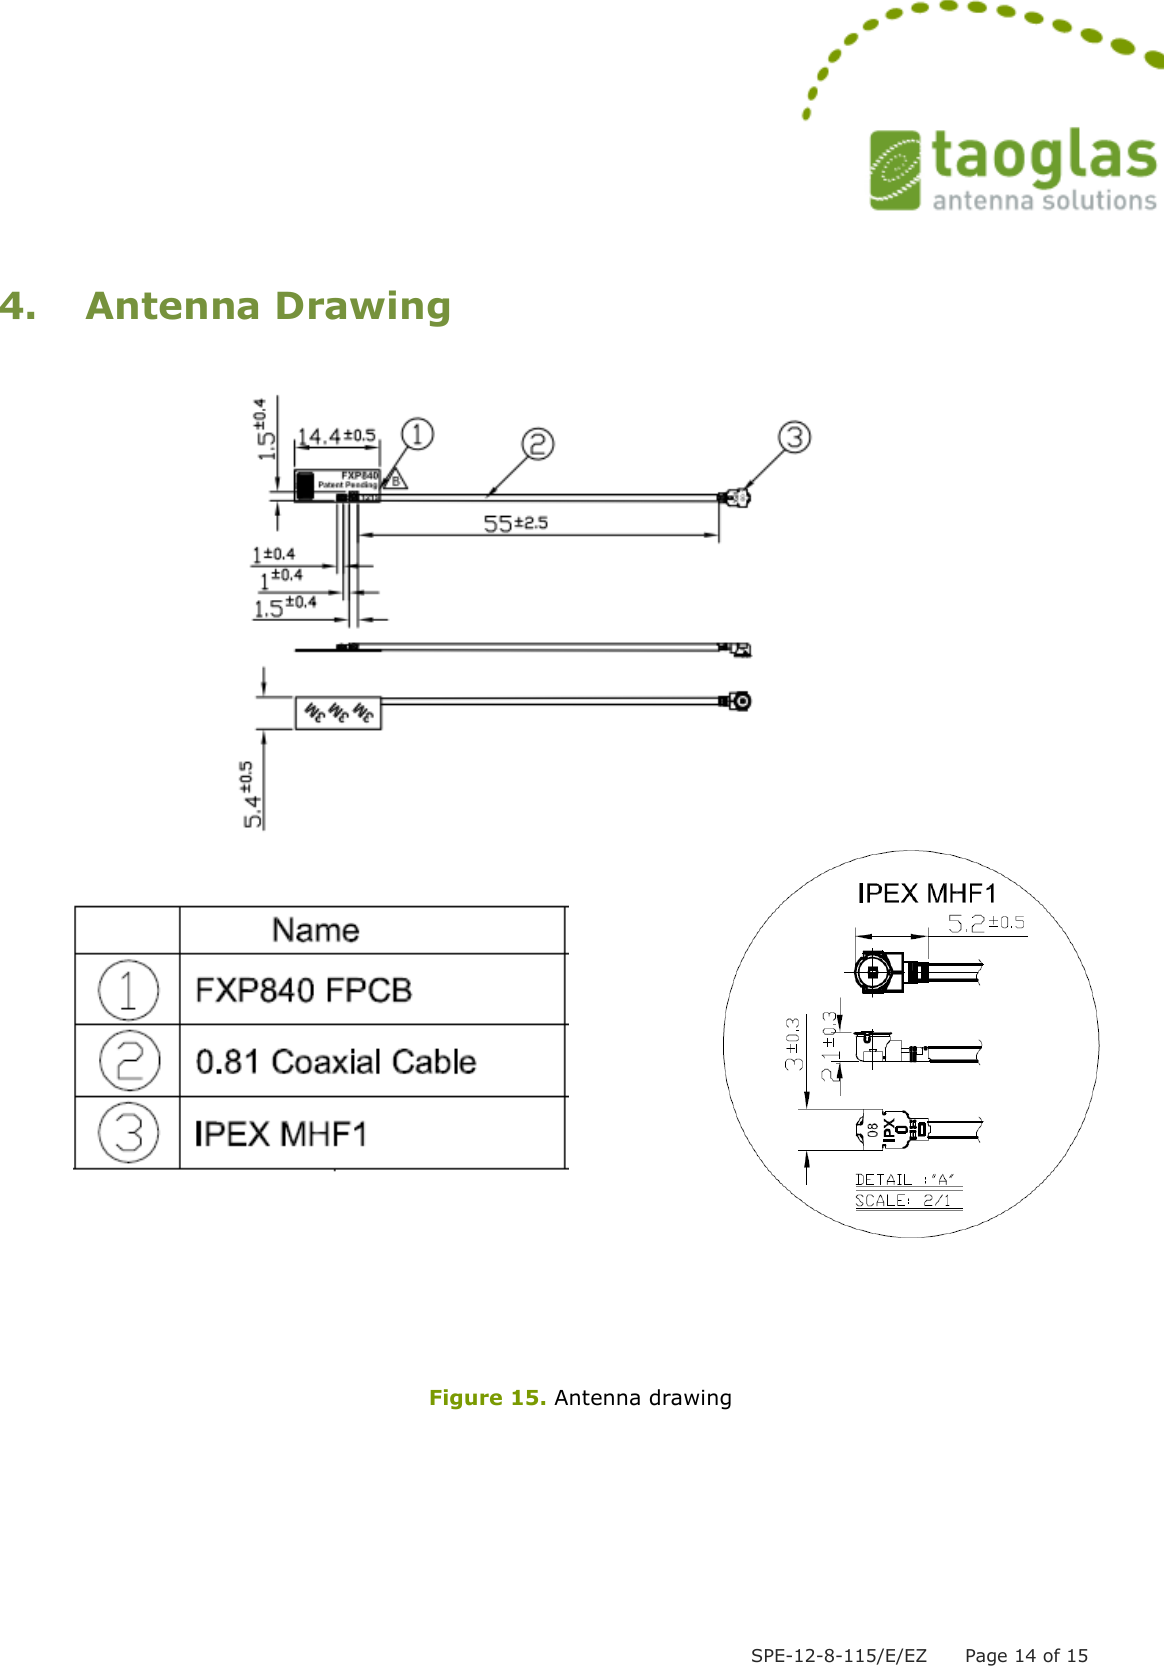  SPE-12-8-115/E/EZ      Page 14 of 15  4.  Antenna Drawing           Figure 15. Antenna drawing 